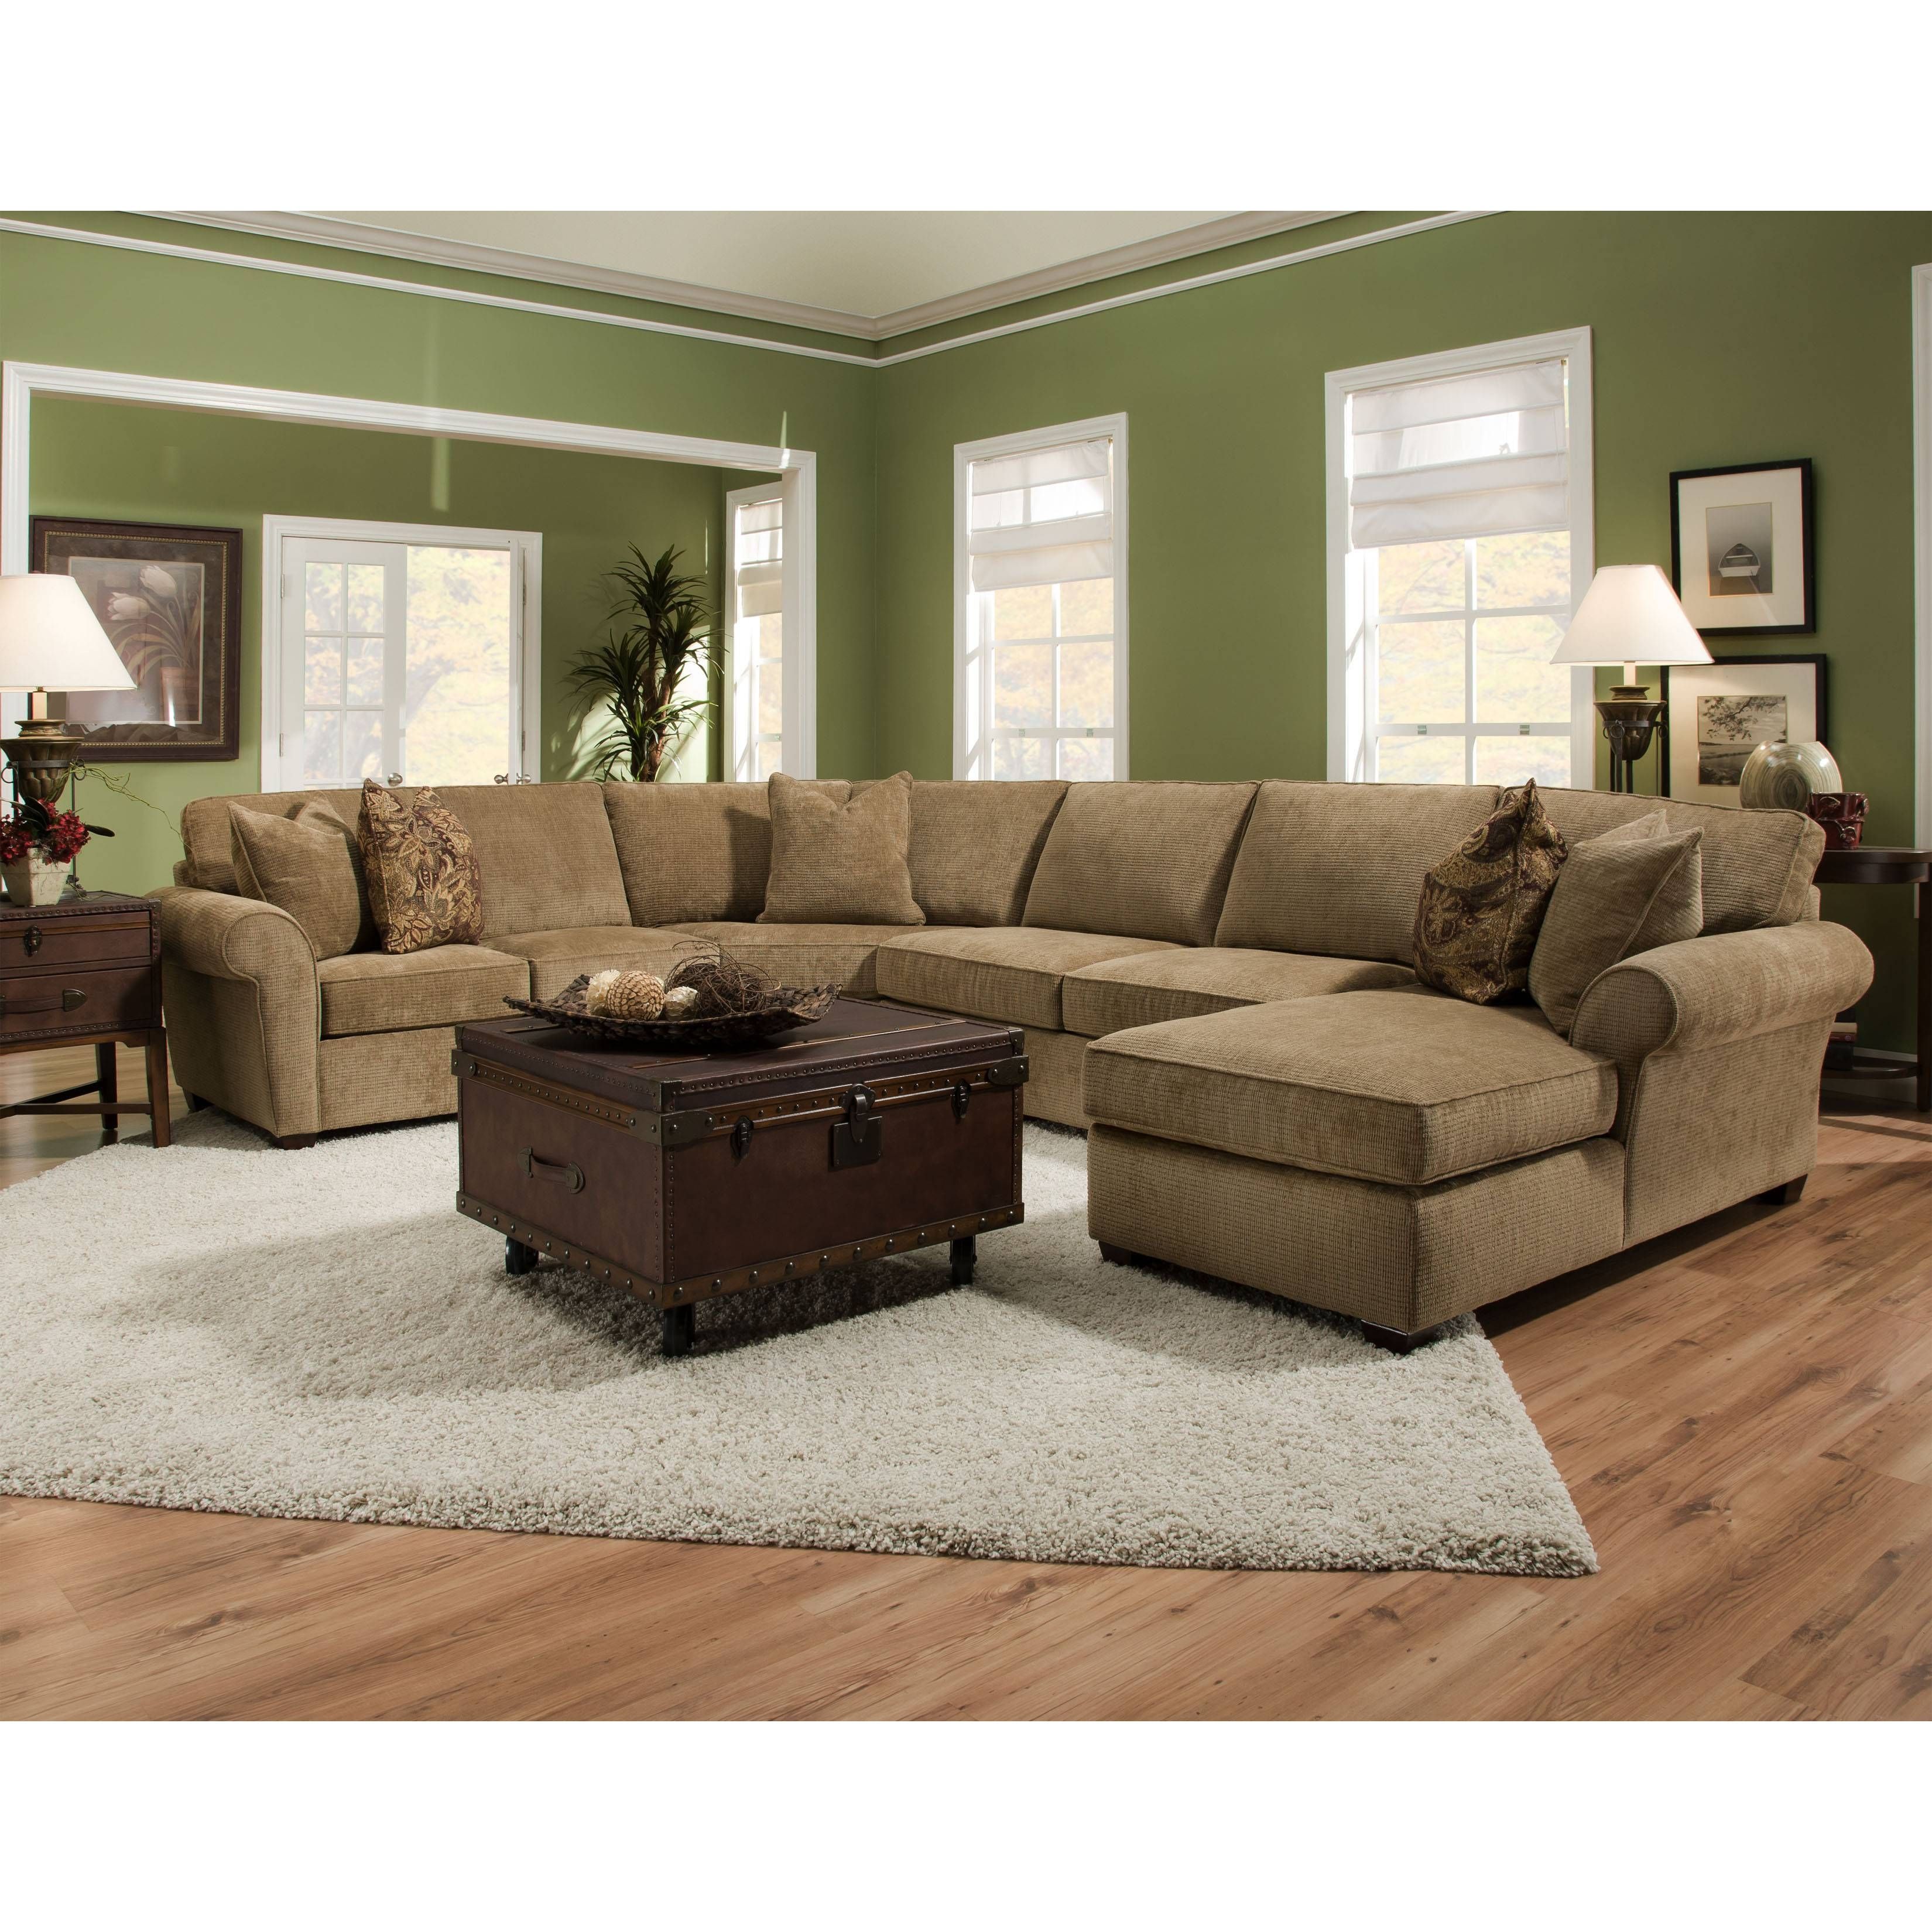 The Most Popular Bauhaus Sectional Sofa 76 For Your American Made Regarding American Made Sectional Sofas (View 4 of 30)